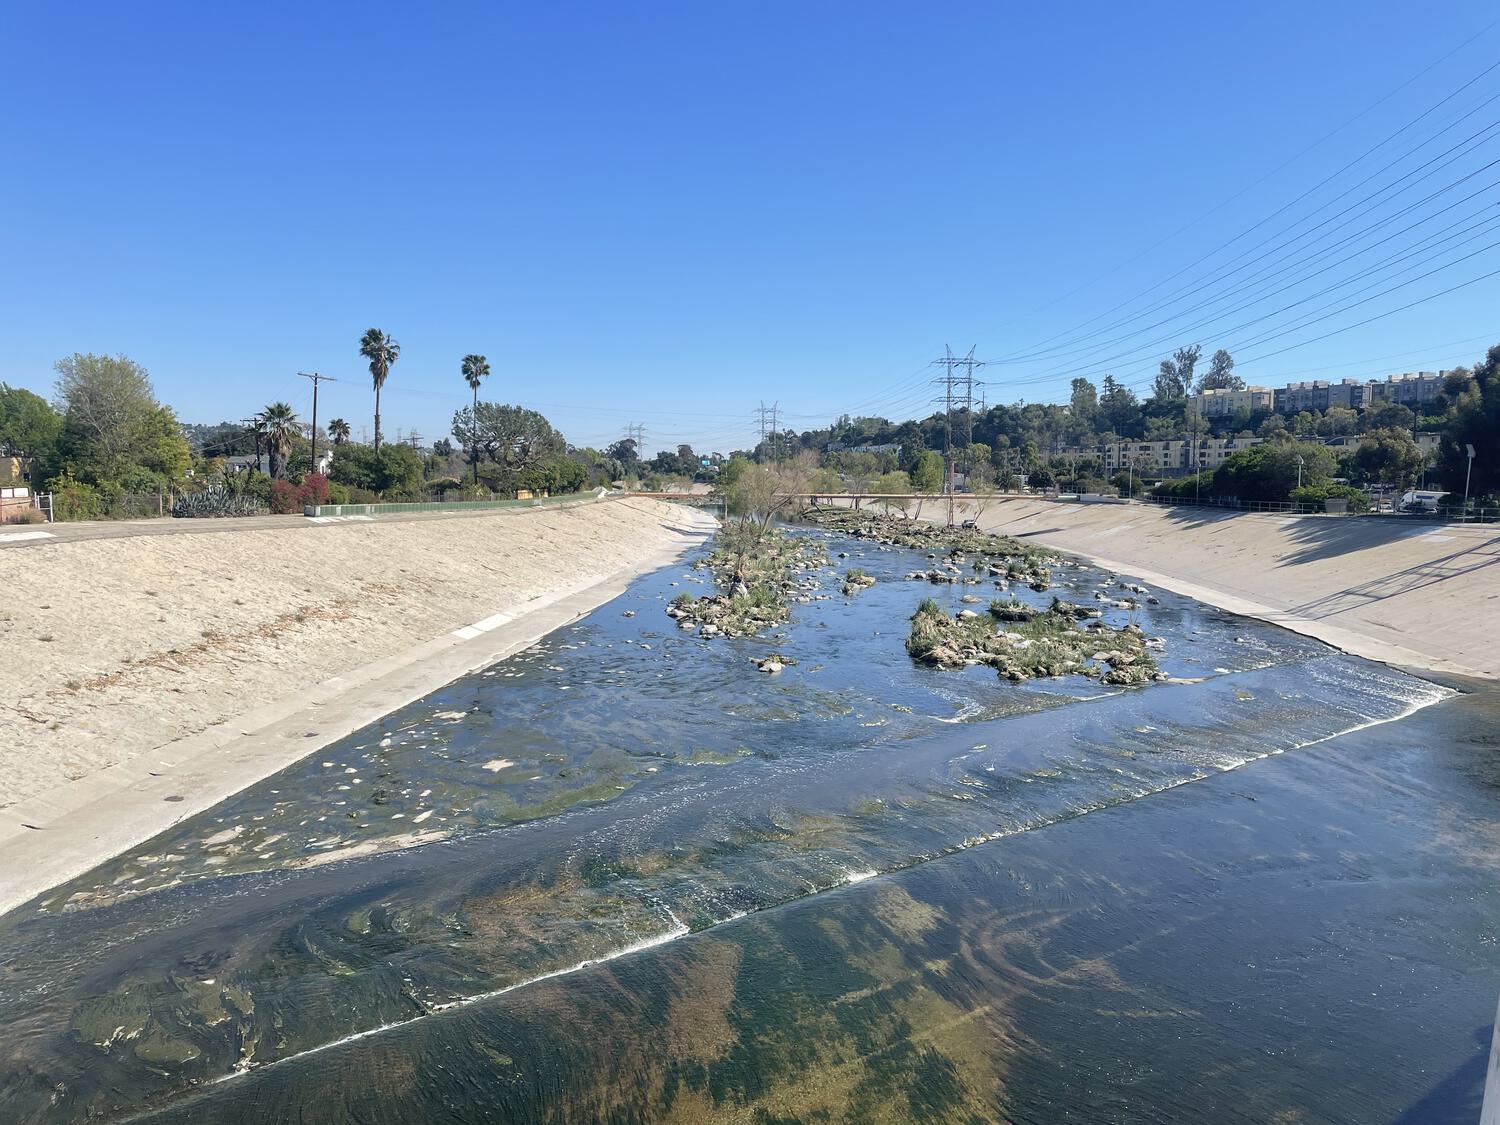 The LA river as seen from overhead, low water and sparse foliage